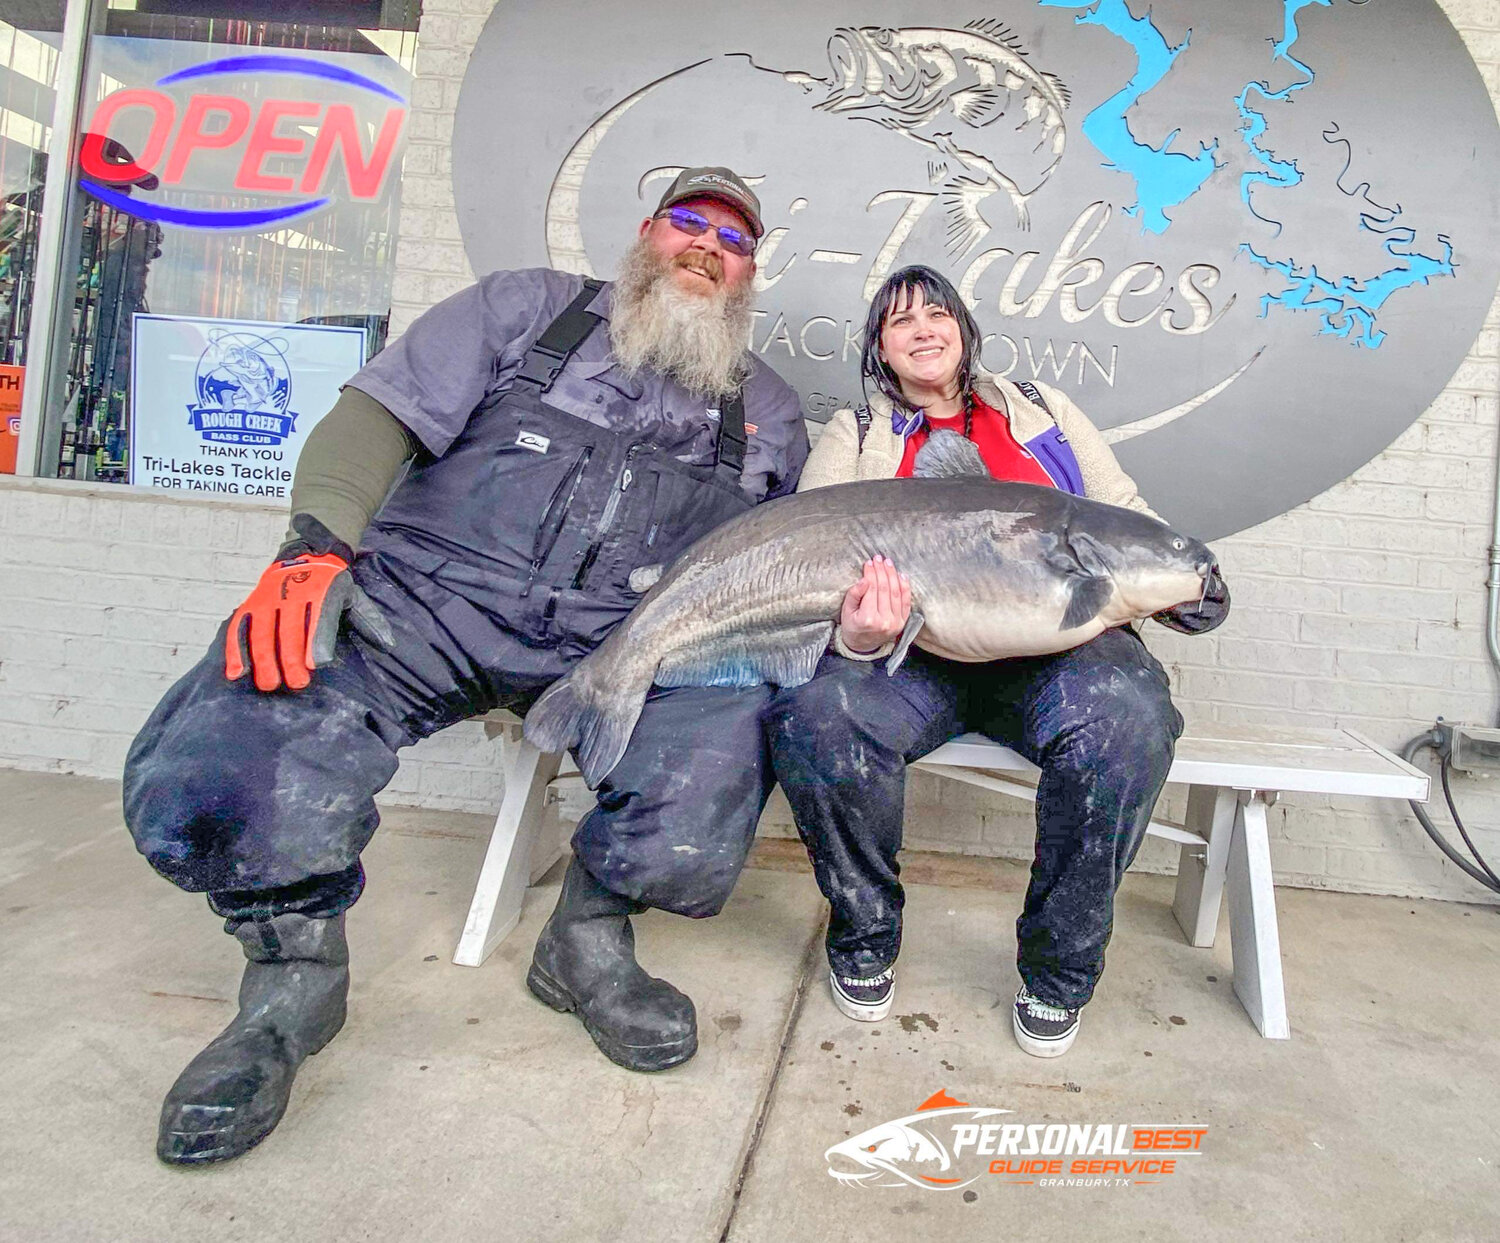 A potentially new Lake Granbury record blue catfish (56.56 pounds) was caught by Laura Katelyn Shepherd, right, while fishing with Mike Watkins, left, of Personal Best Guide Service.